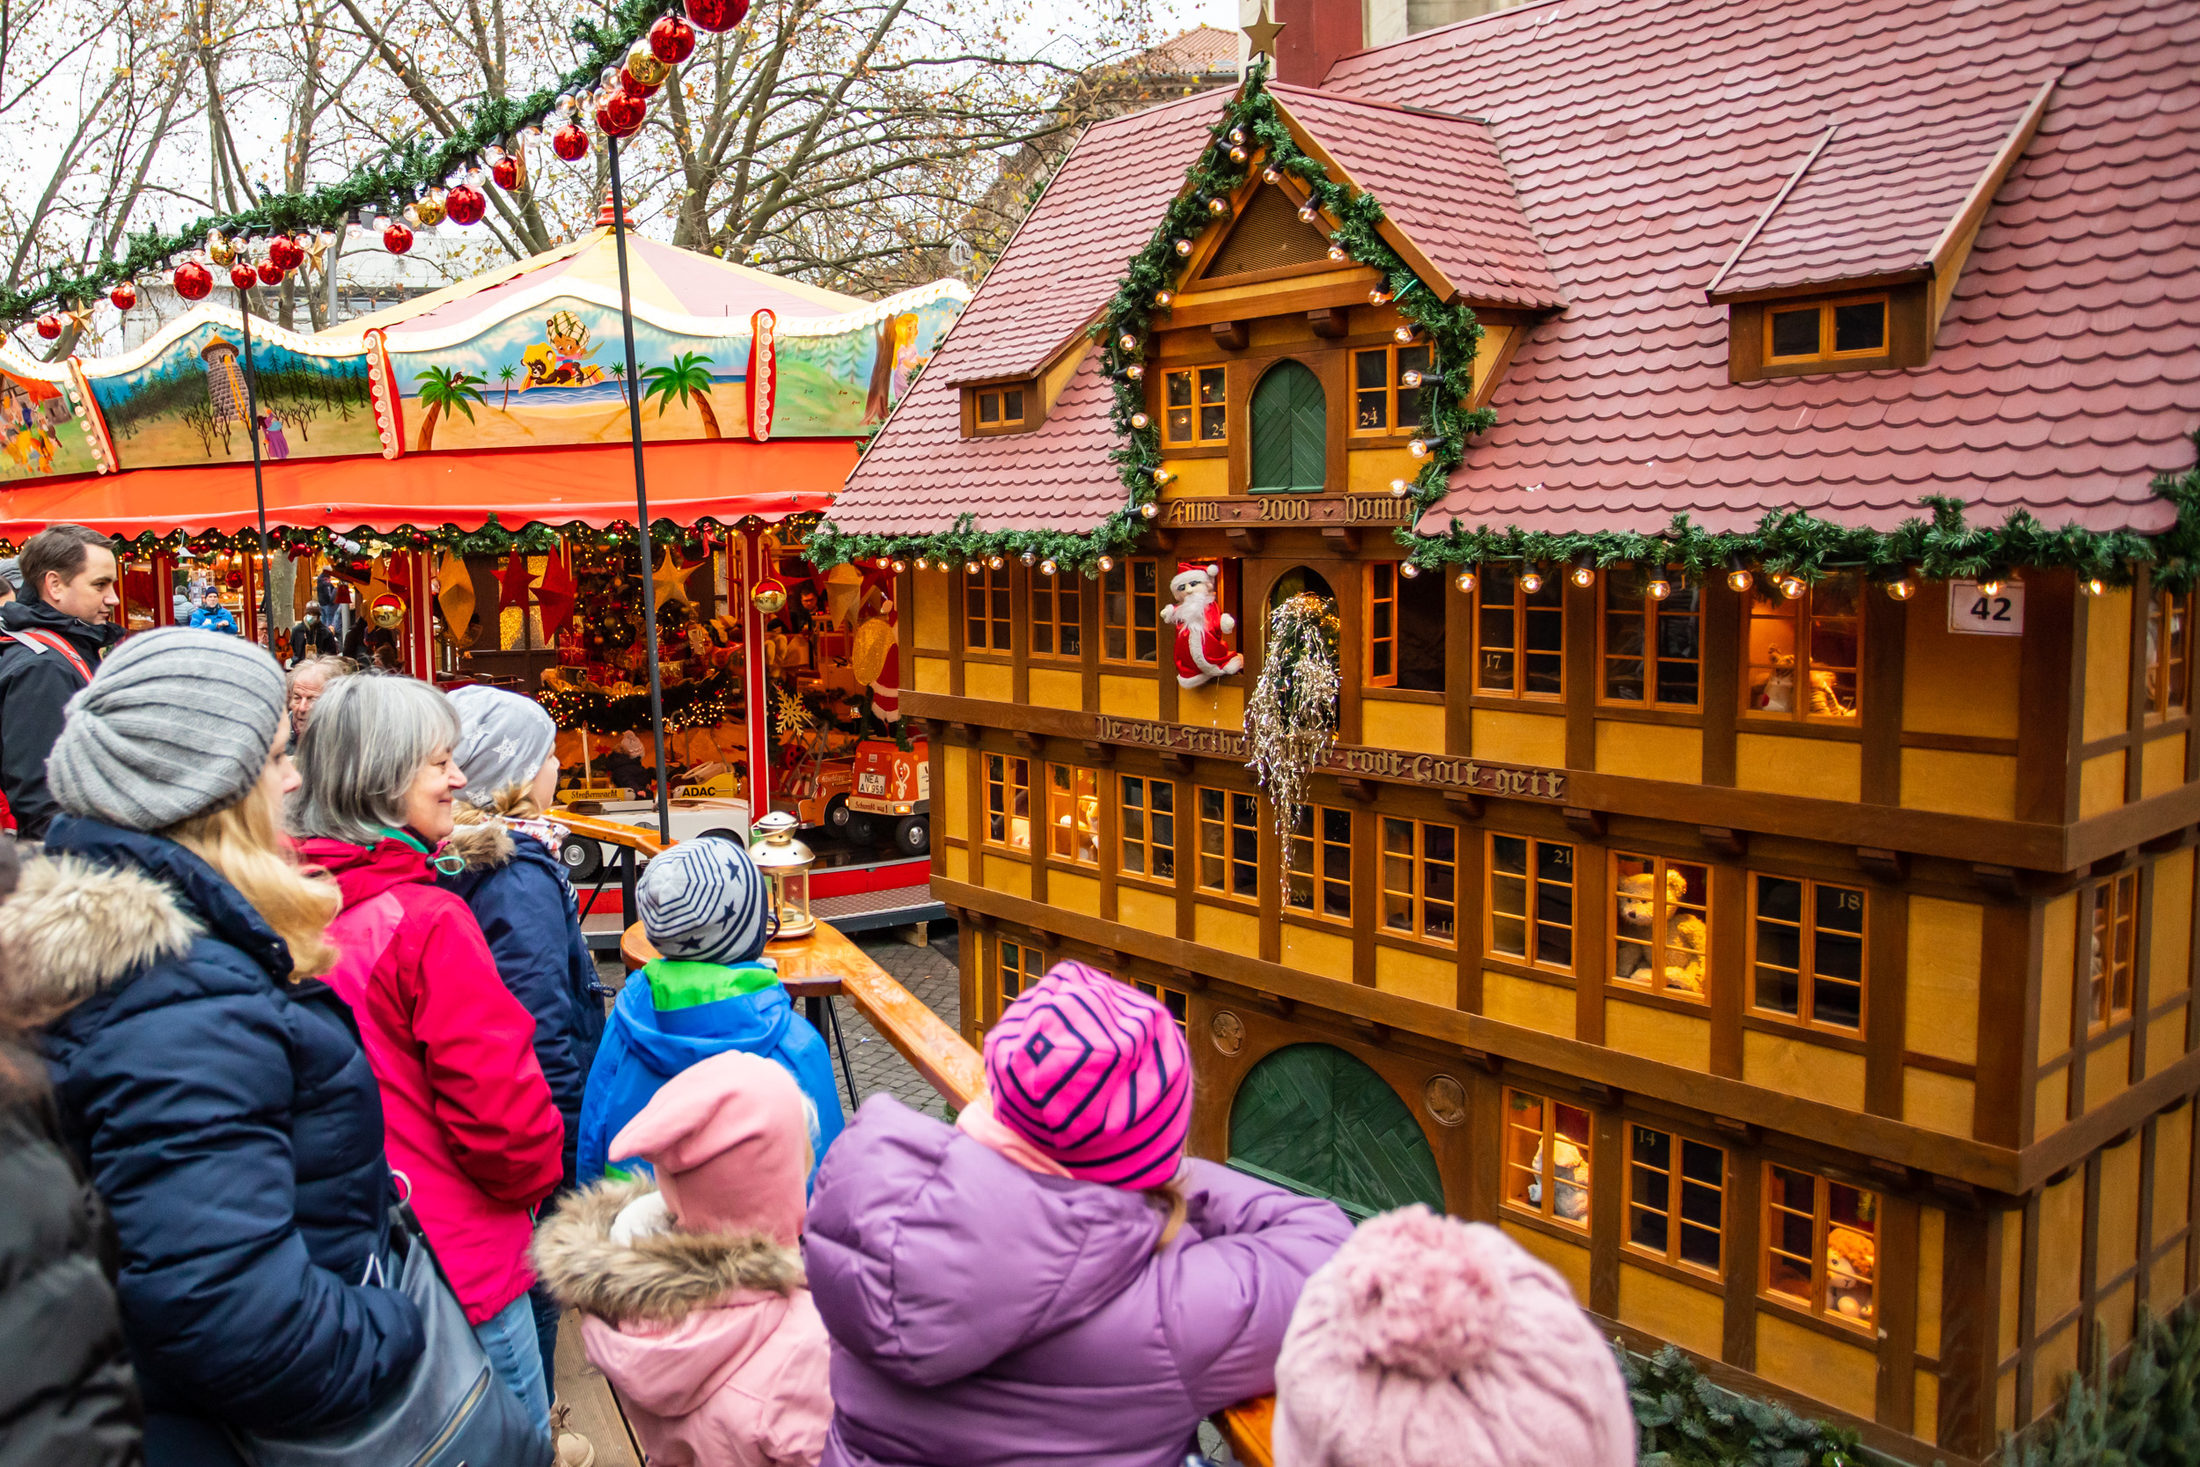 There is a puppet show for children at the Christmas market (Zoom on click)